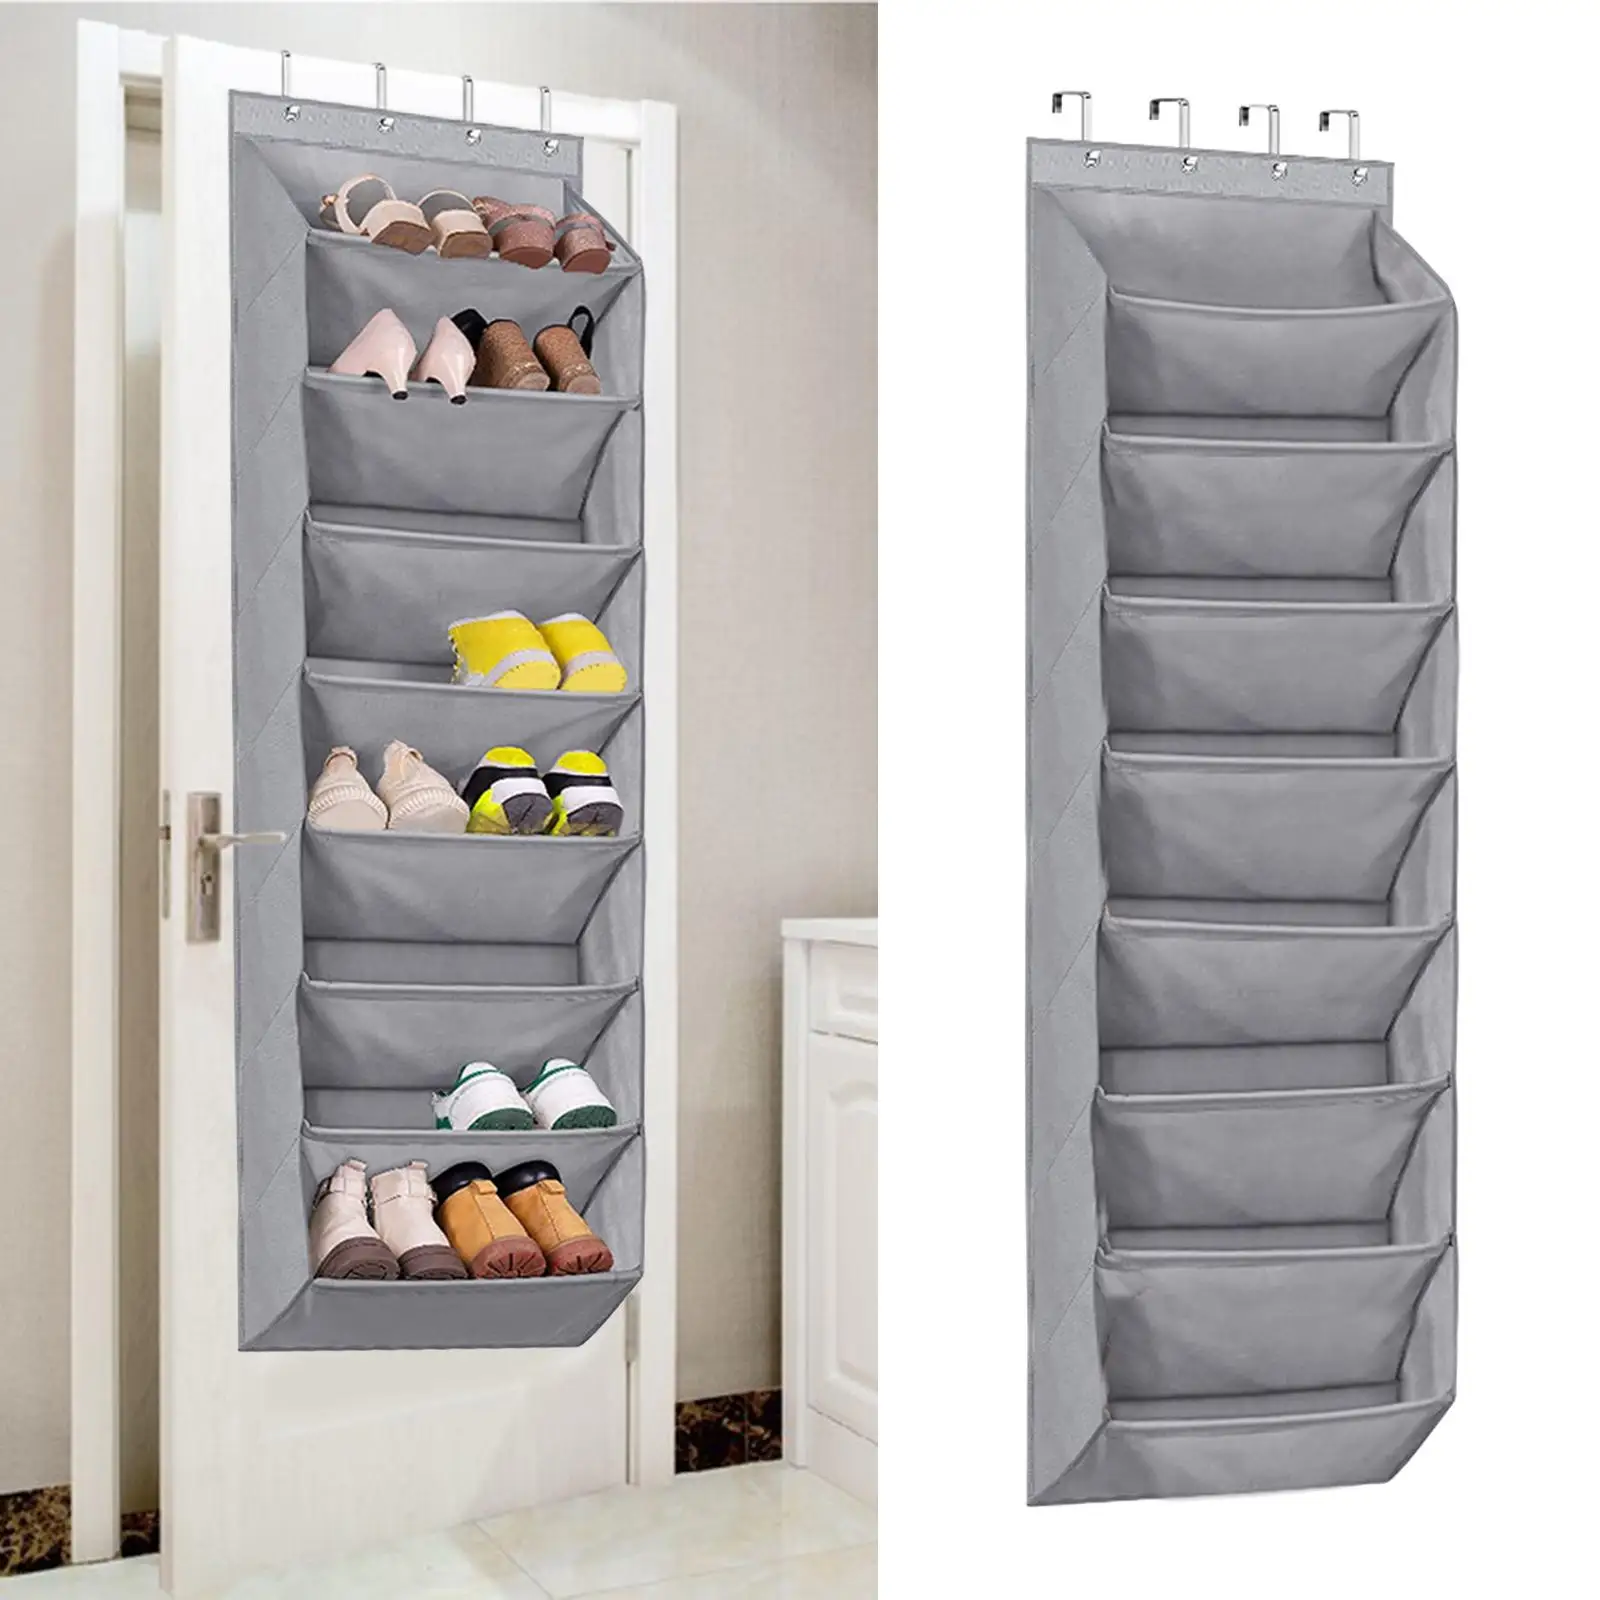 Hanging Shoe Rack 8 Tier Oxford Cloth Resuable for Kids Adults Large Deep Pockets Door Shoe Rack for Baby Items Clothing